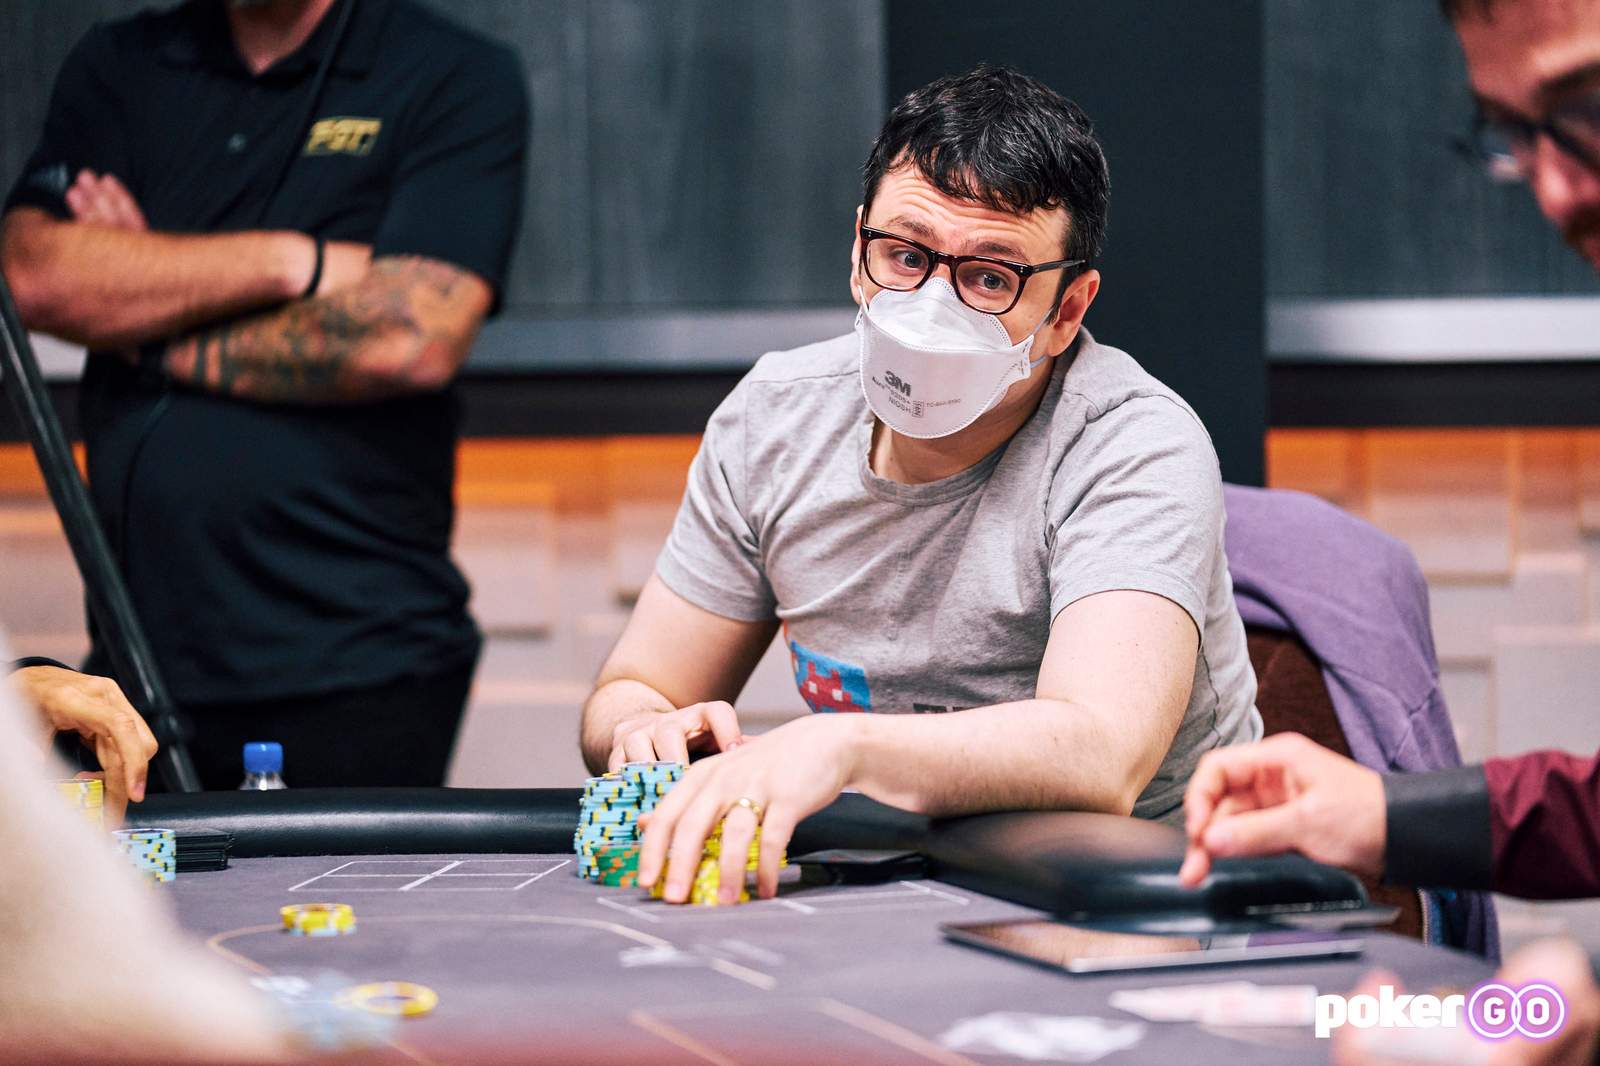 Isaac Haxton Leads Super High Roller Bowl: Pot-Limit Omaha Final Table